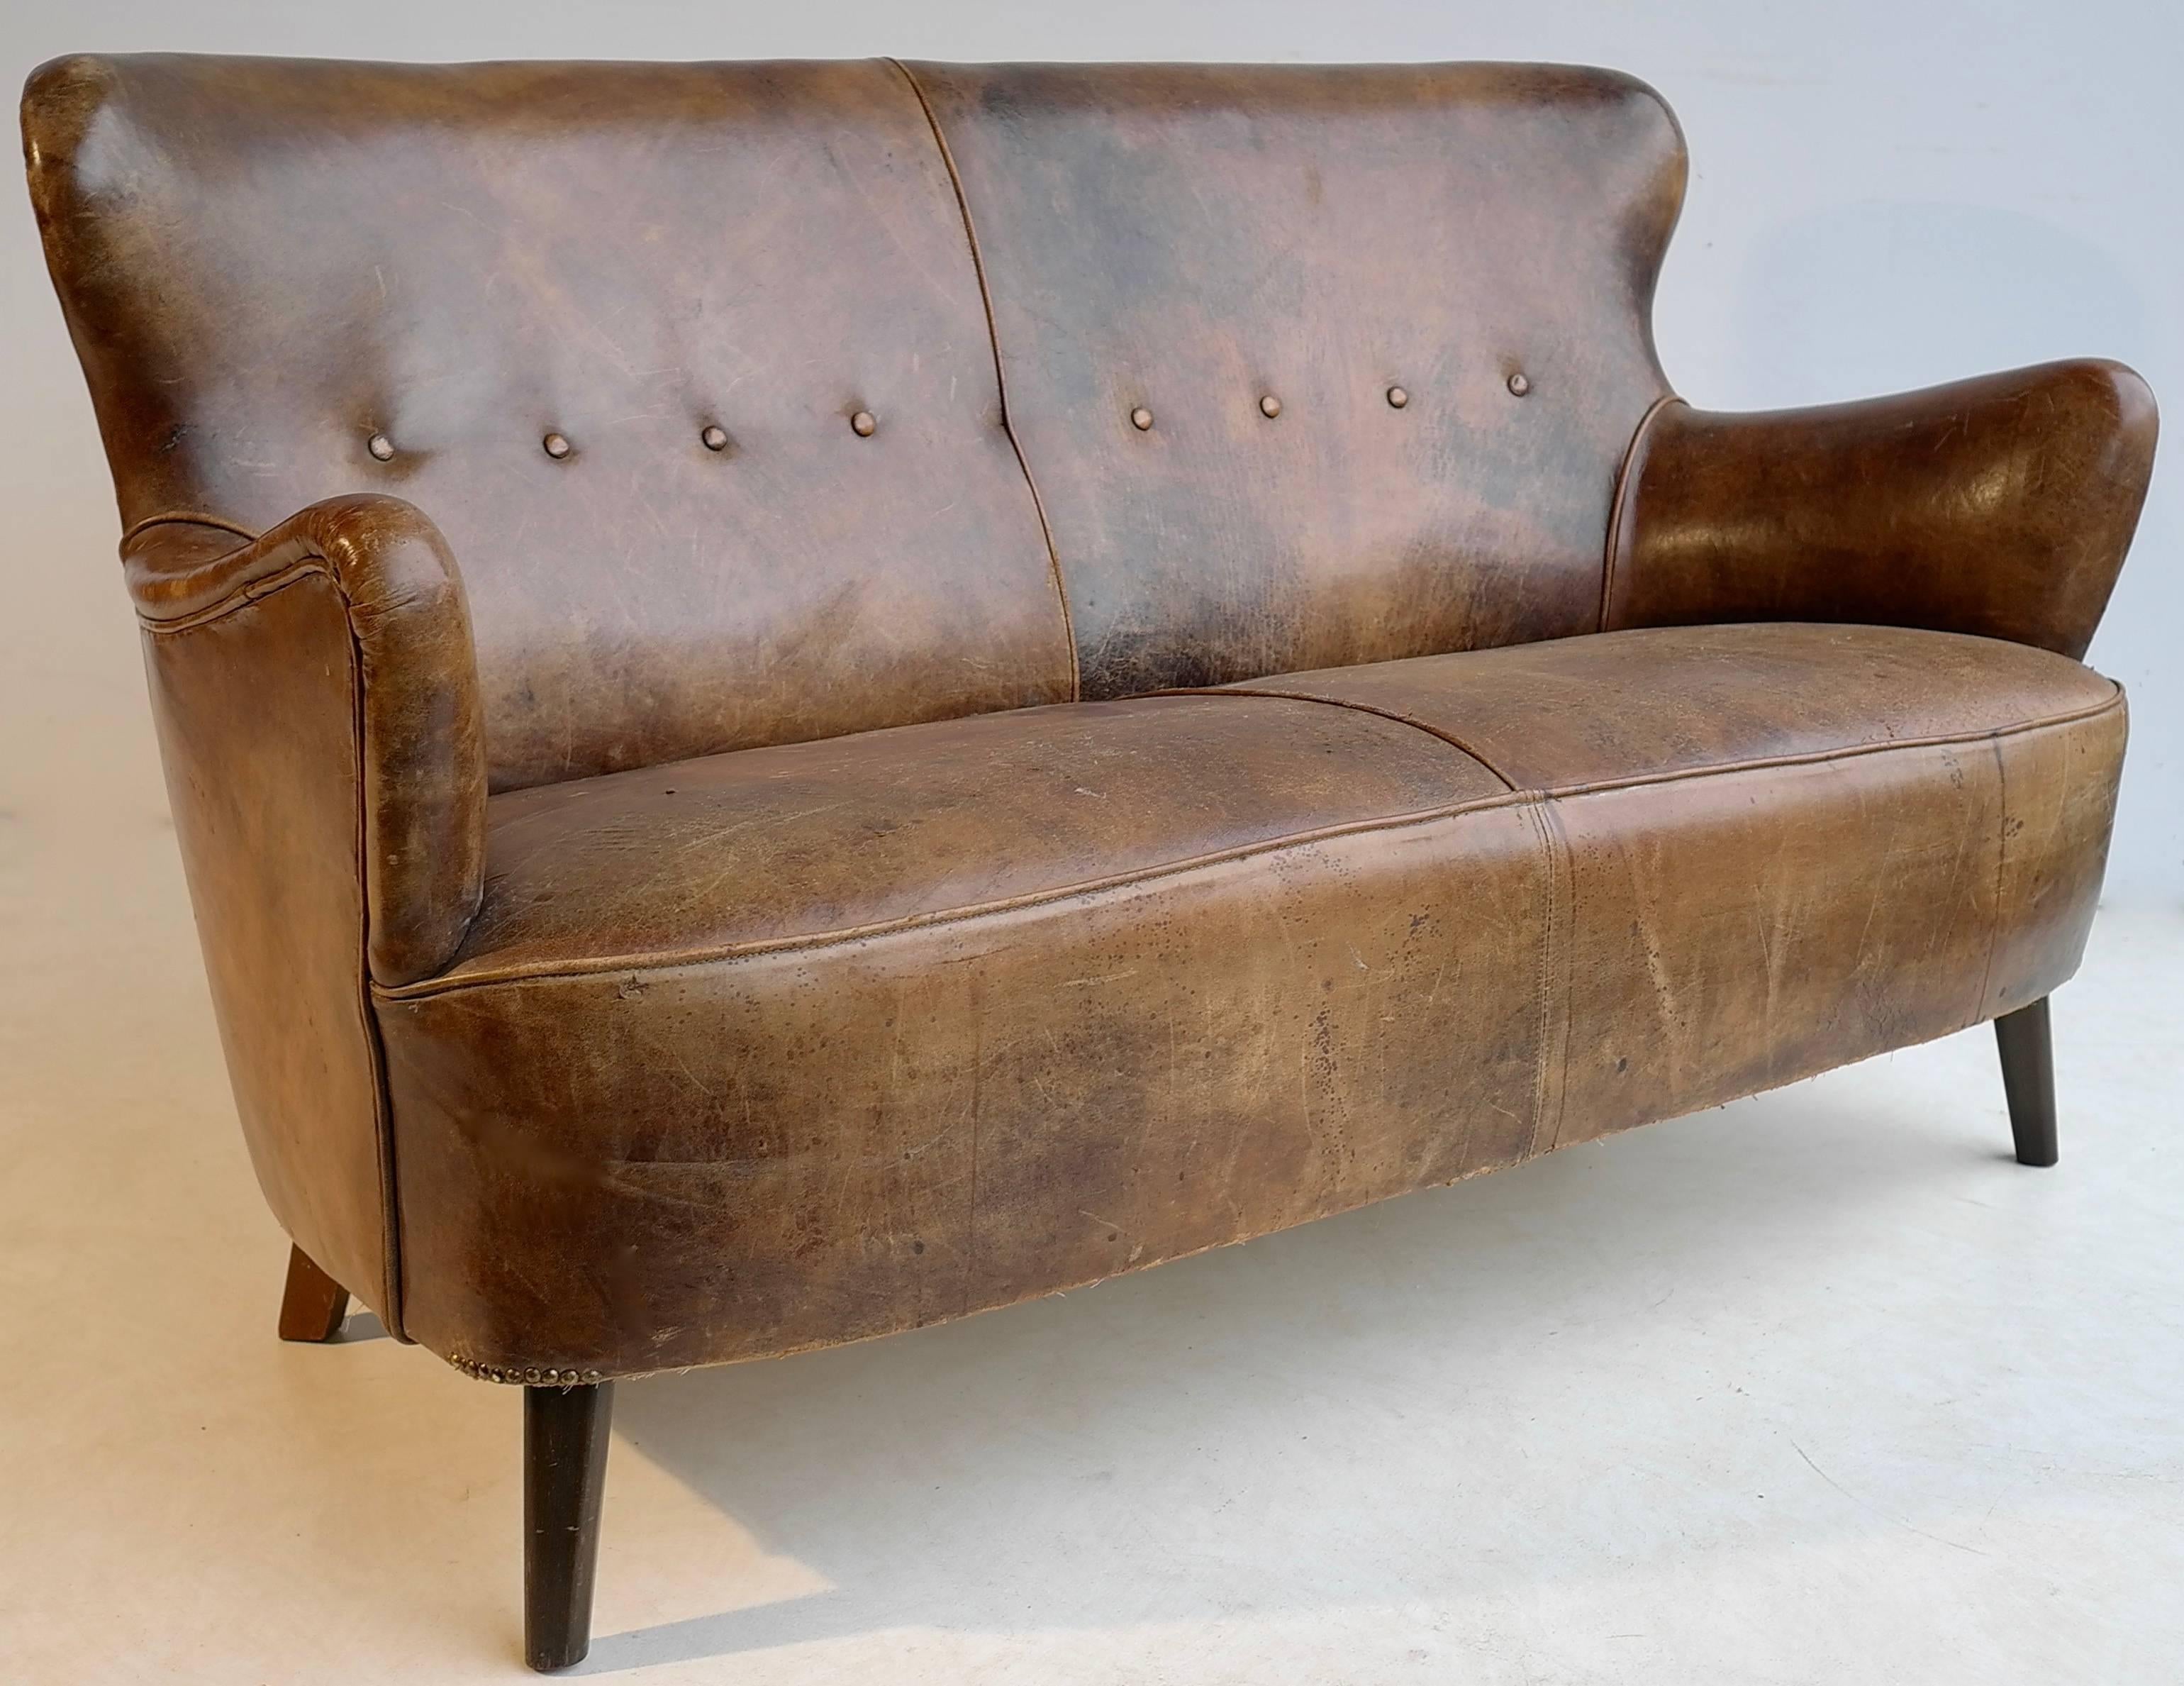 Cognac leather sofa with a rich patina, by Theo Ruth for Artifort.

Wonderful original patina and wear. Broken in like your favorite baseball glove. The sofa has various patina, stains, rubs, scratches and wear. And we wouldn't have it any other